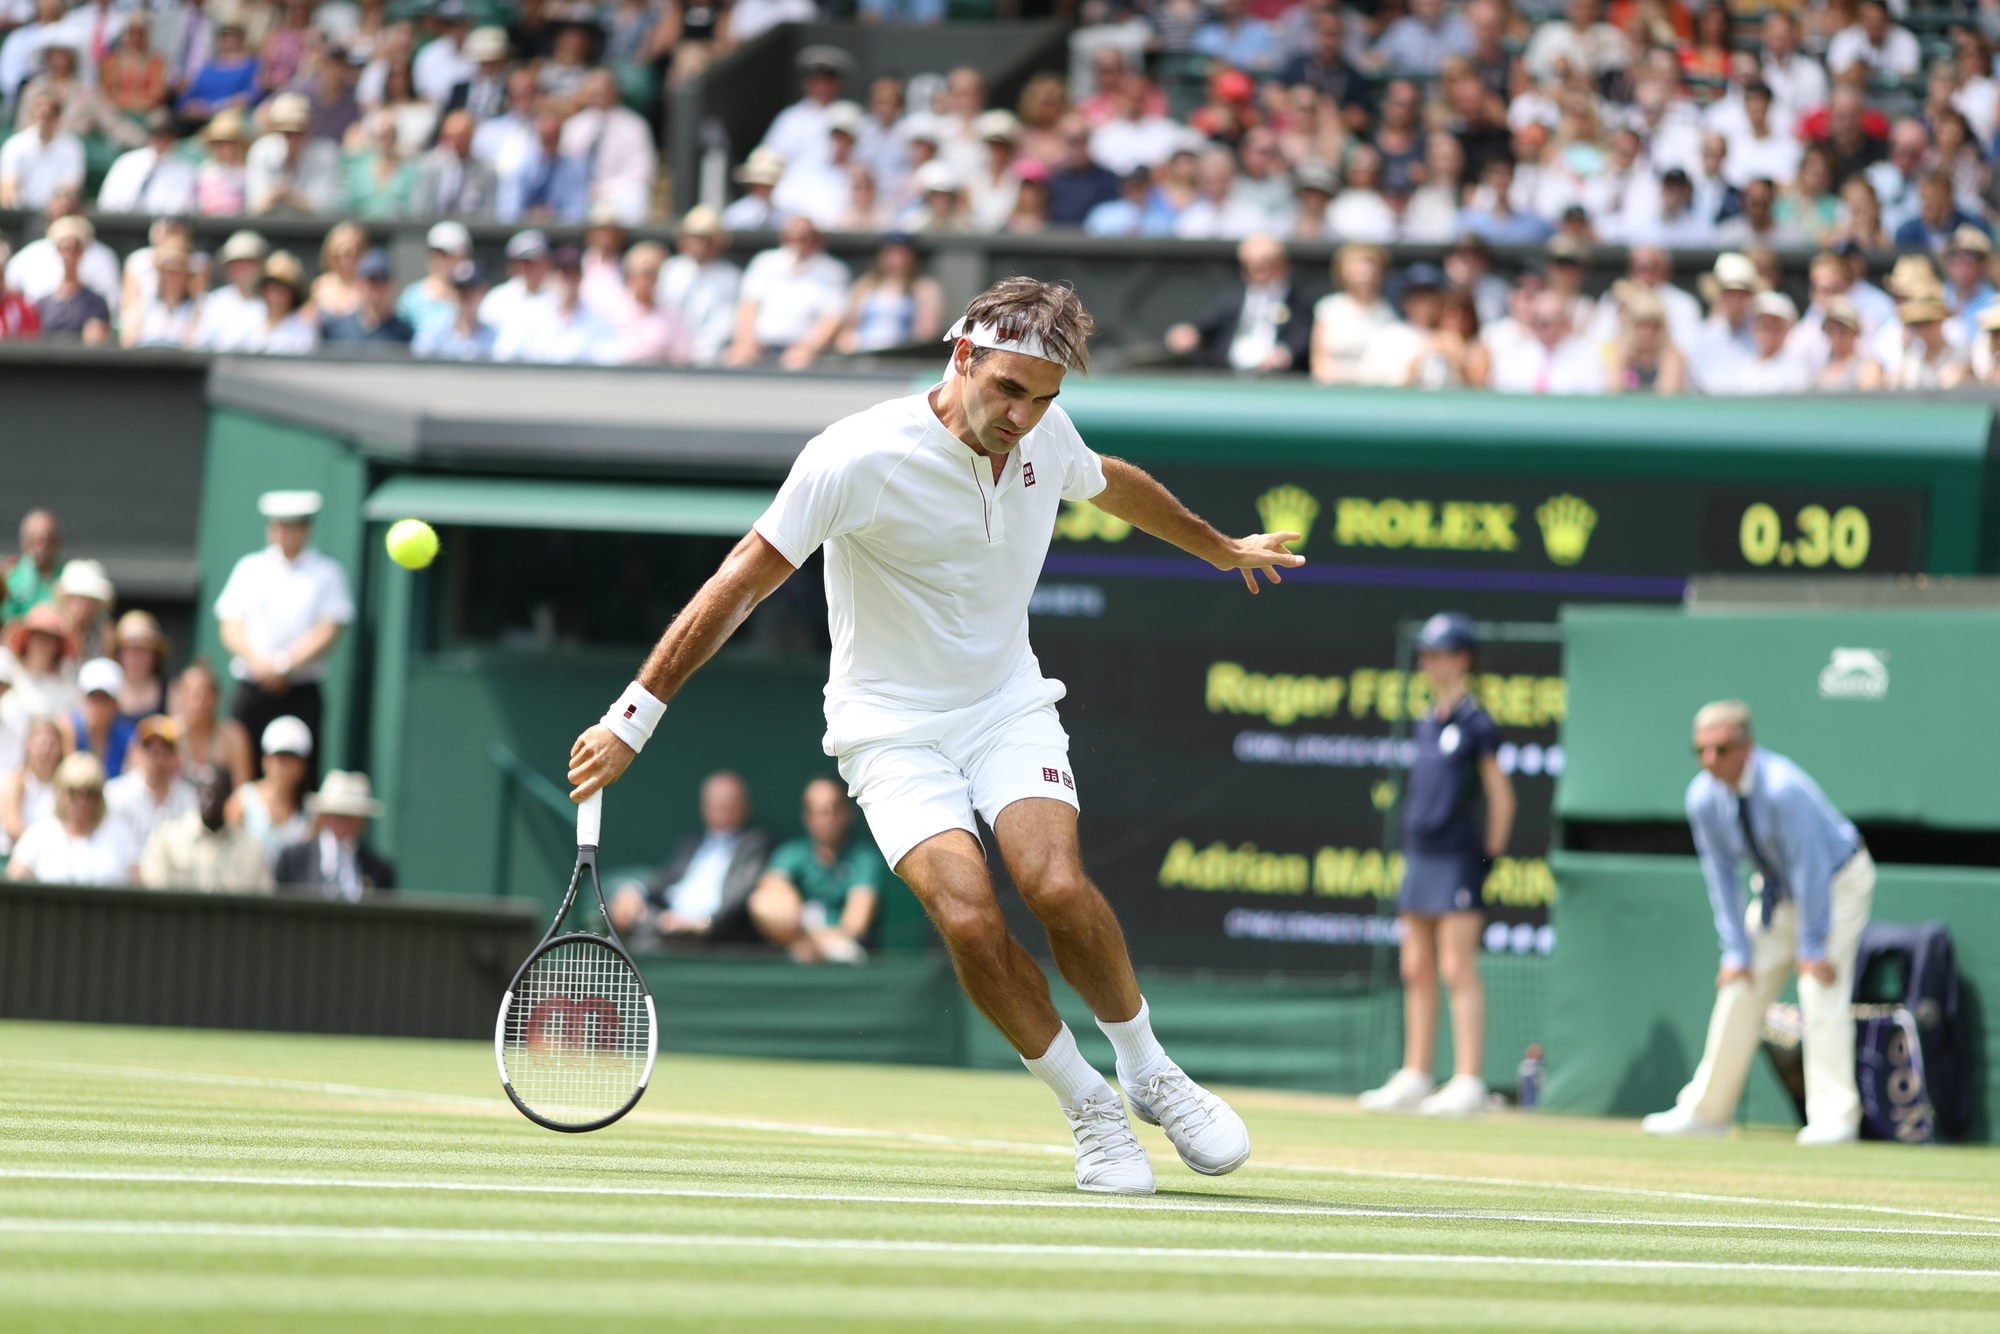 Federer Defeats Mannarino in Straight Sets